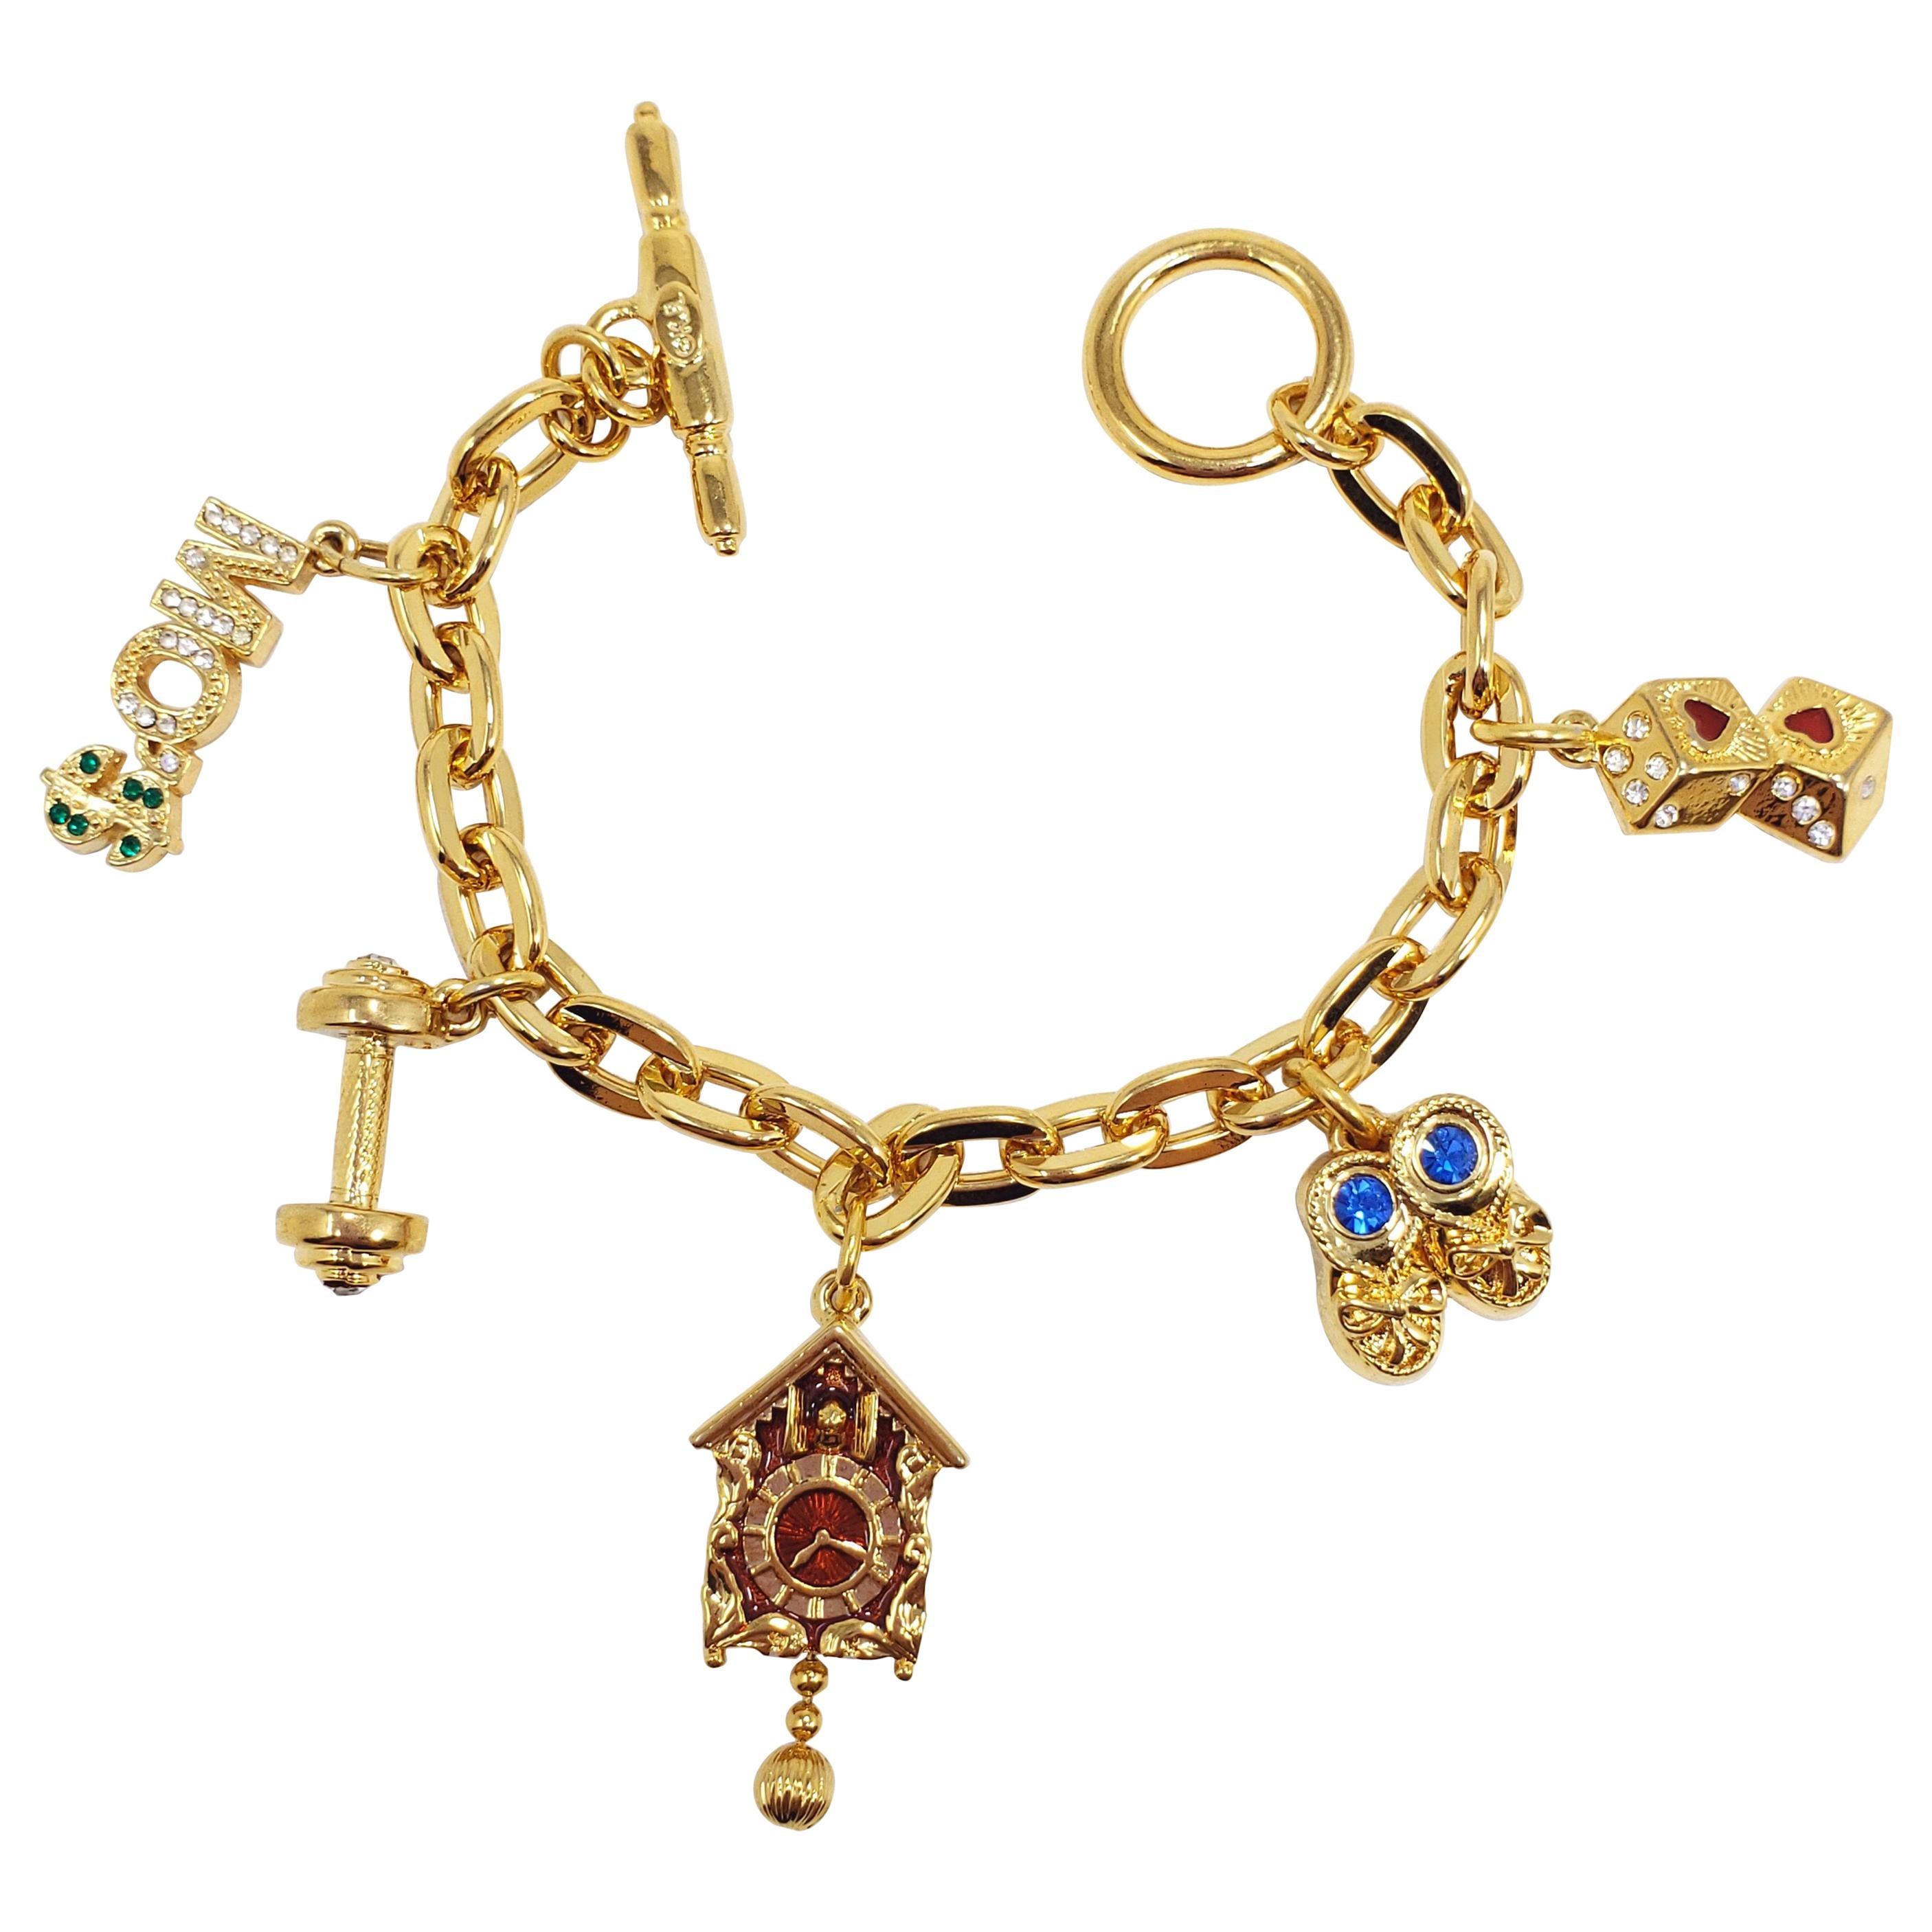 KJL Kenneth Jay Lane Chain Link Five Charm Bracelet, with Toggle Clasp, in Gold For Sale